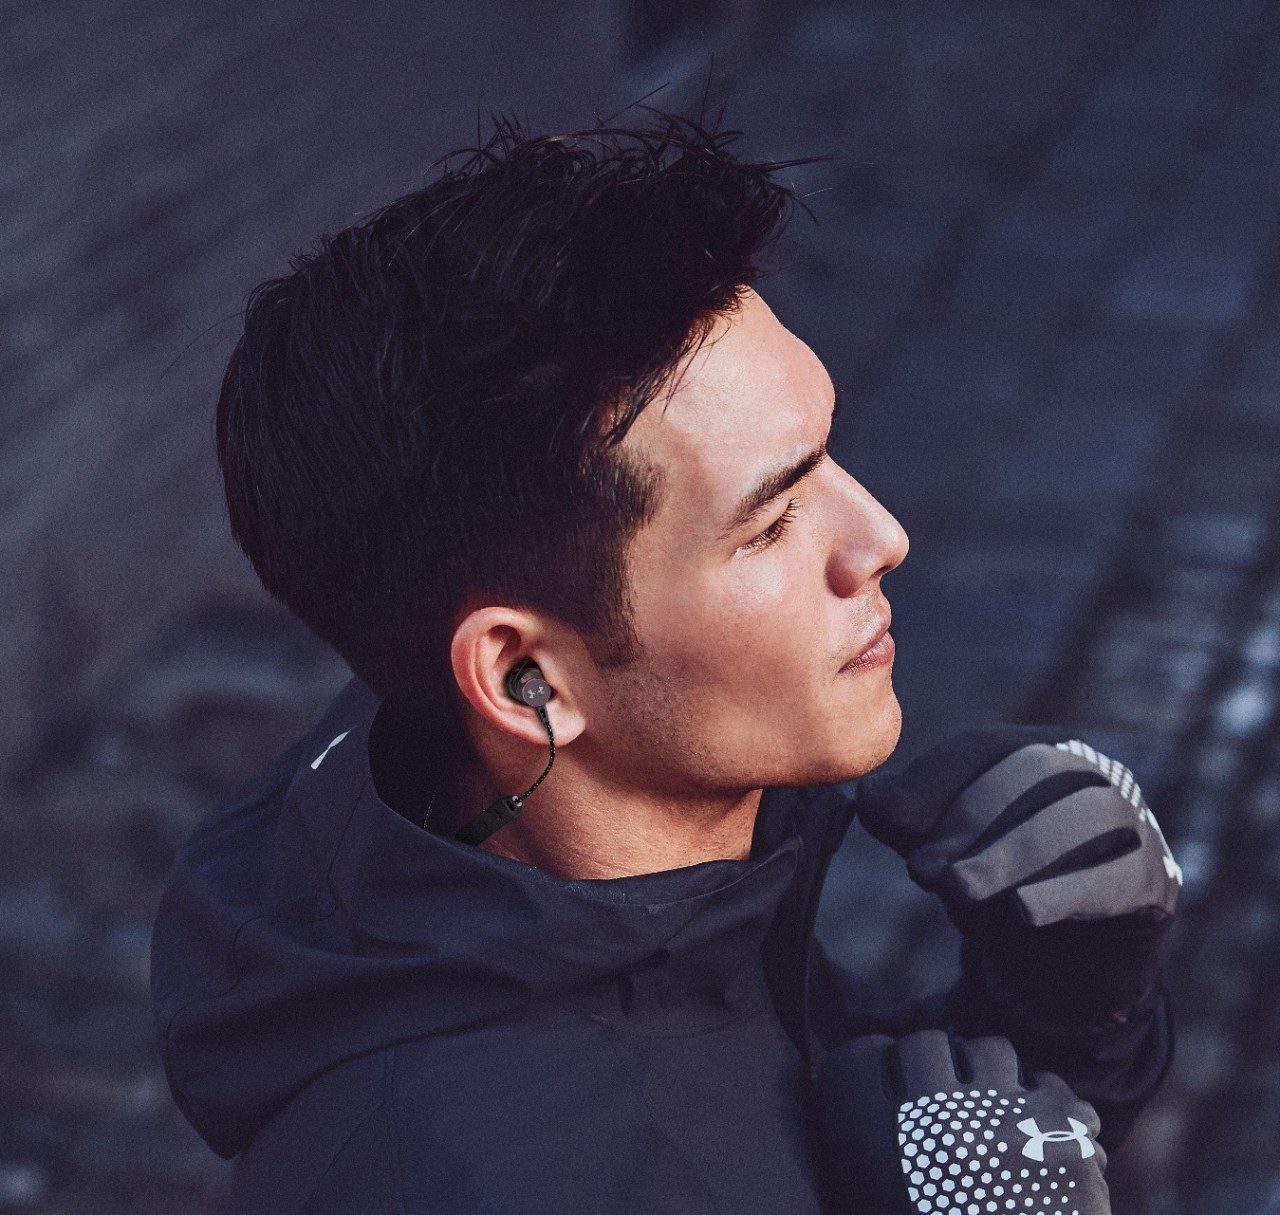 The UA® Sport Wireless React are built to stay in place during short and long distance runs or workouts with their lightweight, in-ear design.